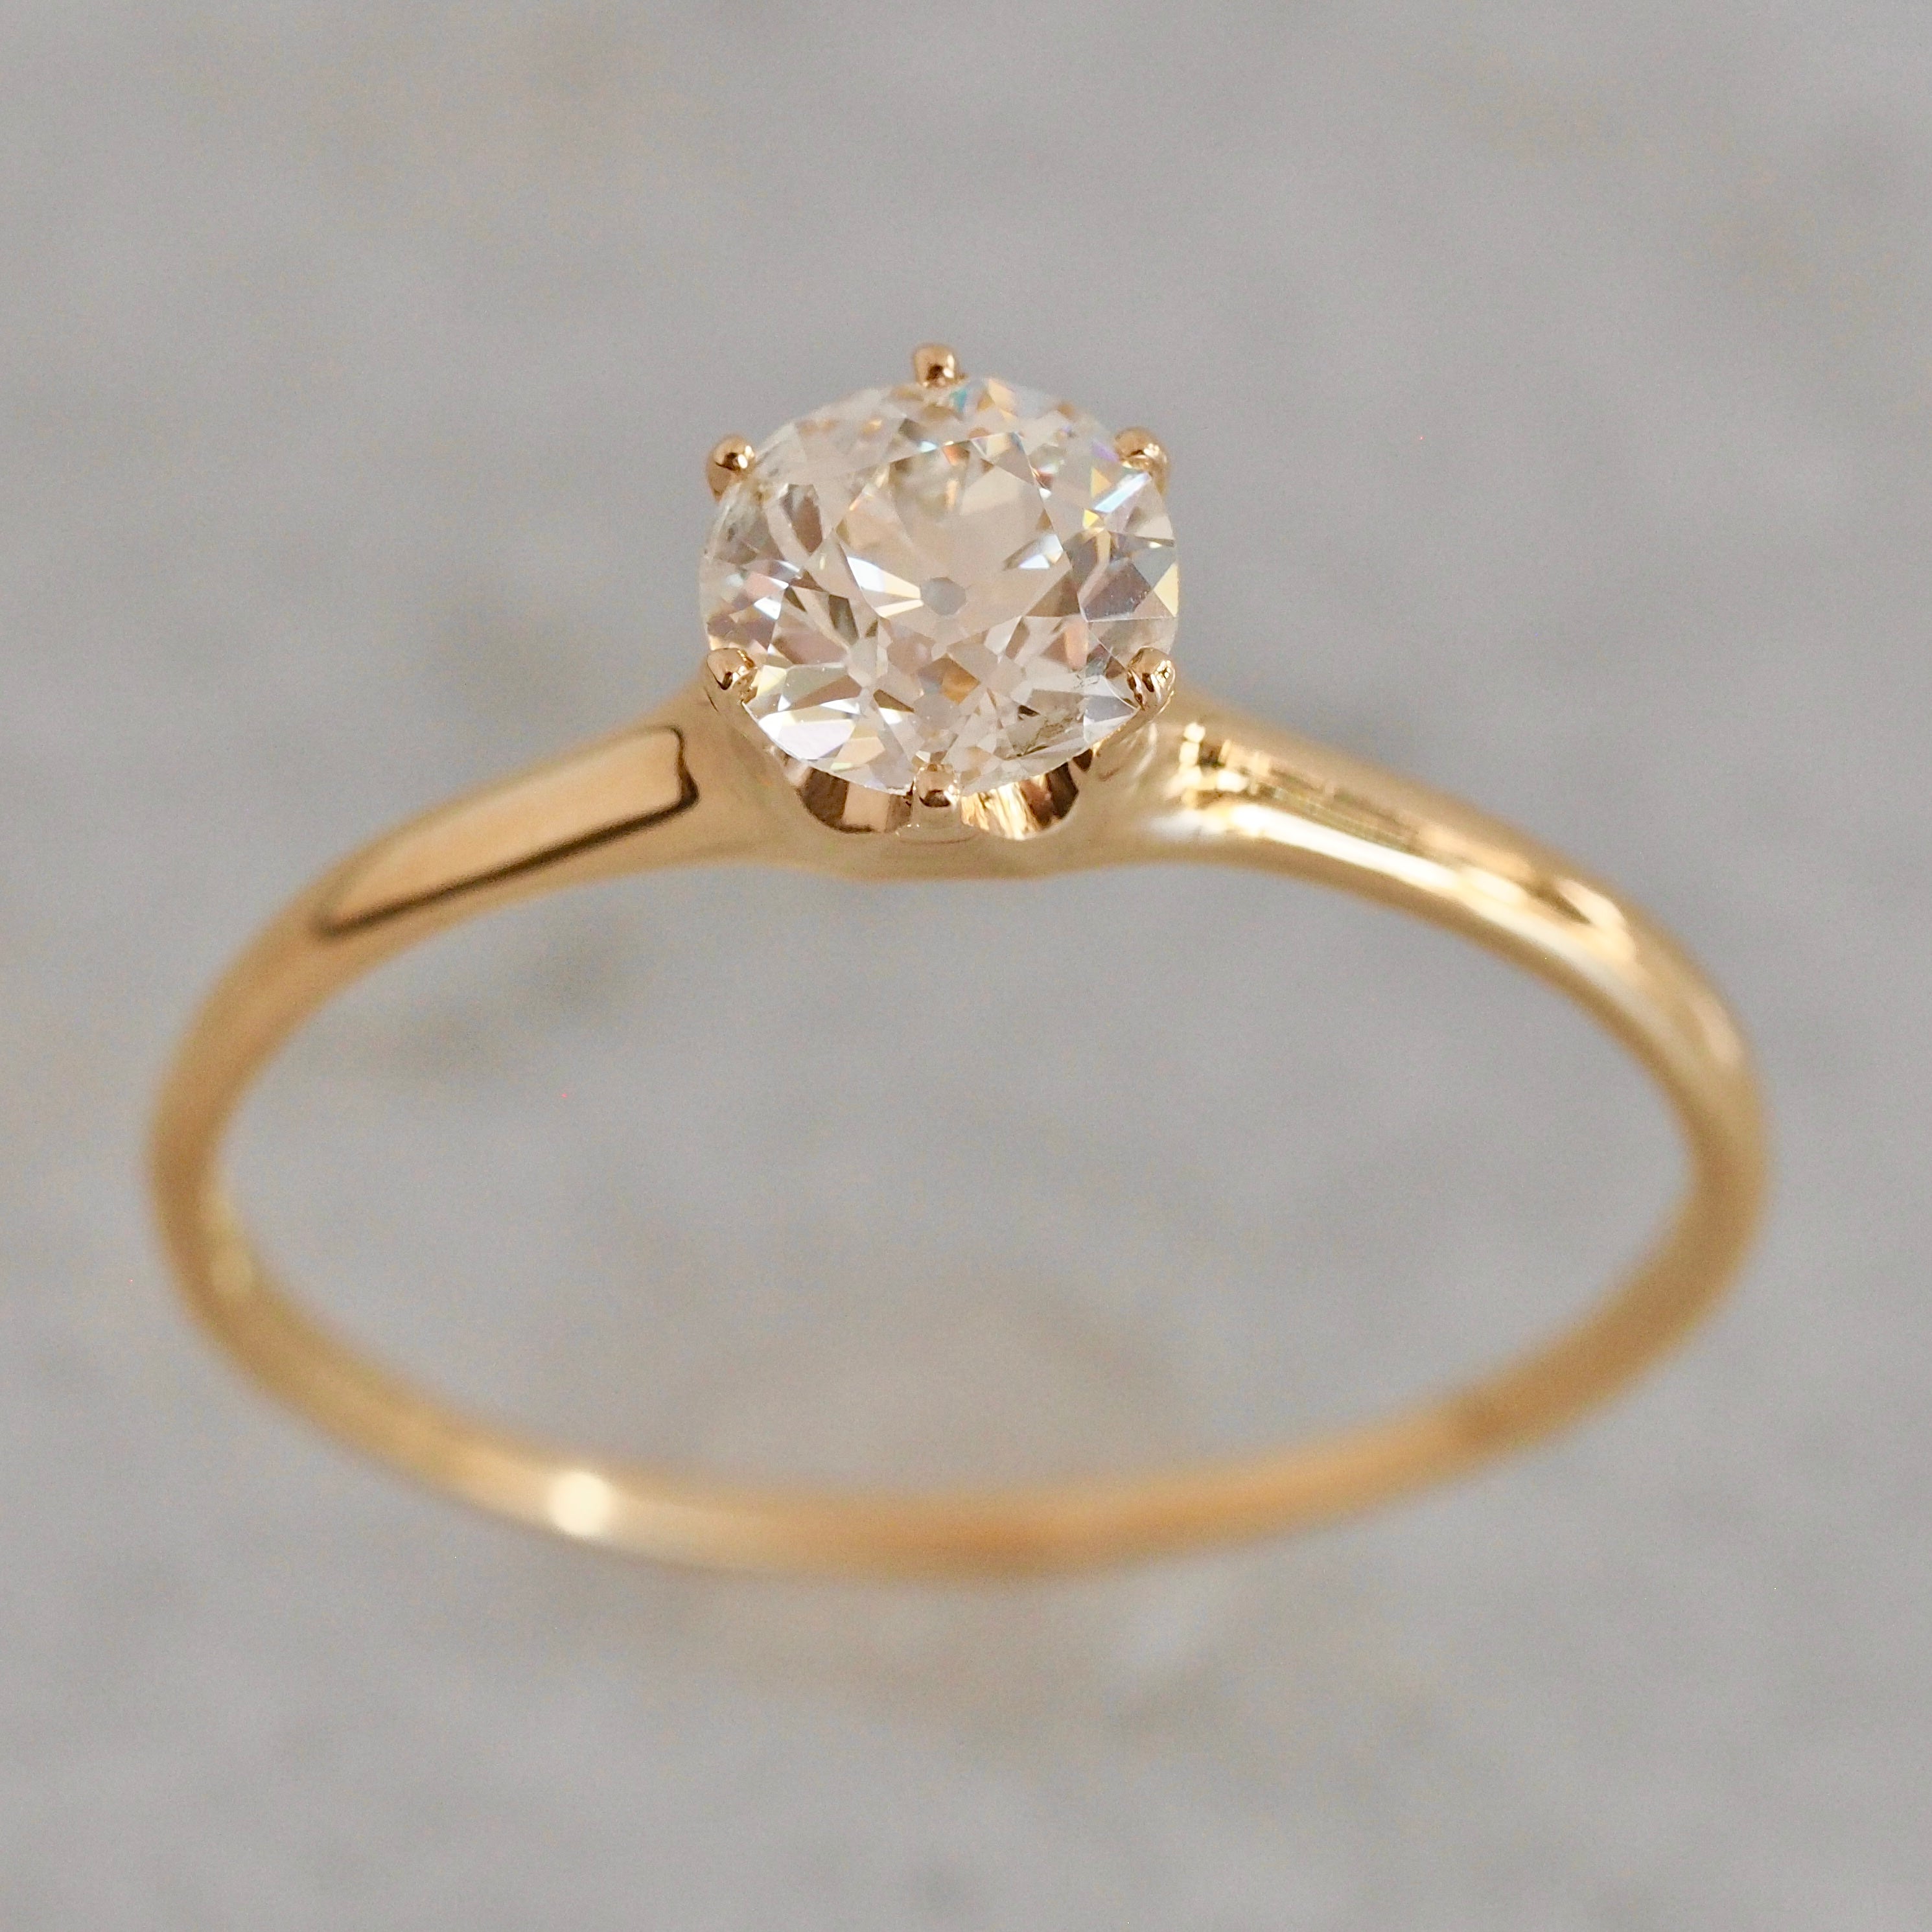 Antique 18k Gold Peacock Old European Cut Diamond Solitaire Ring